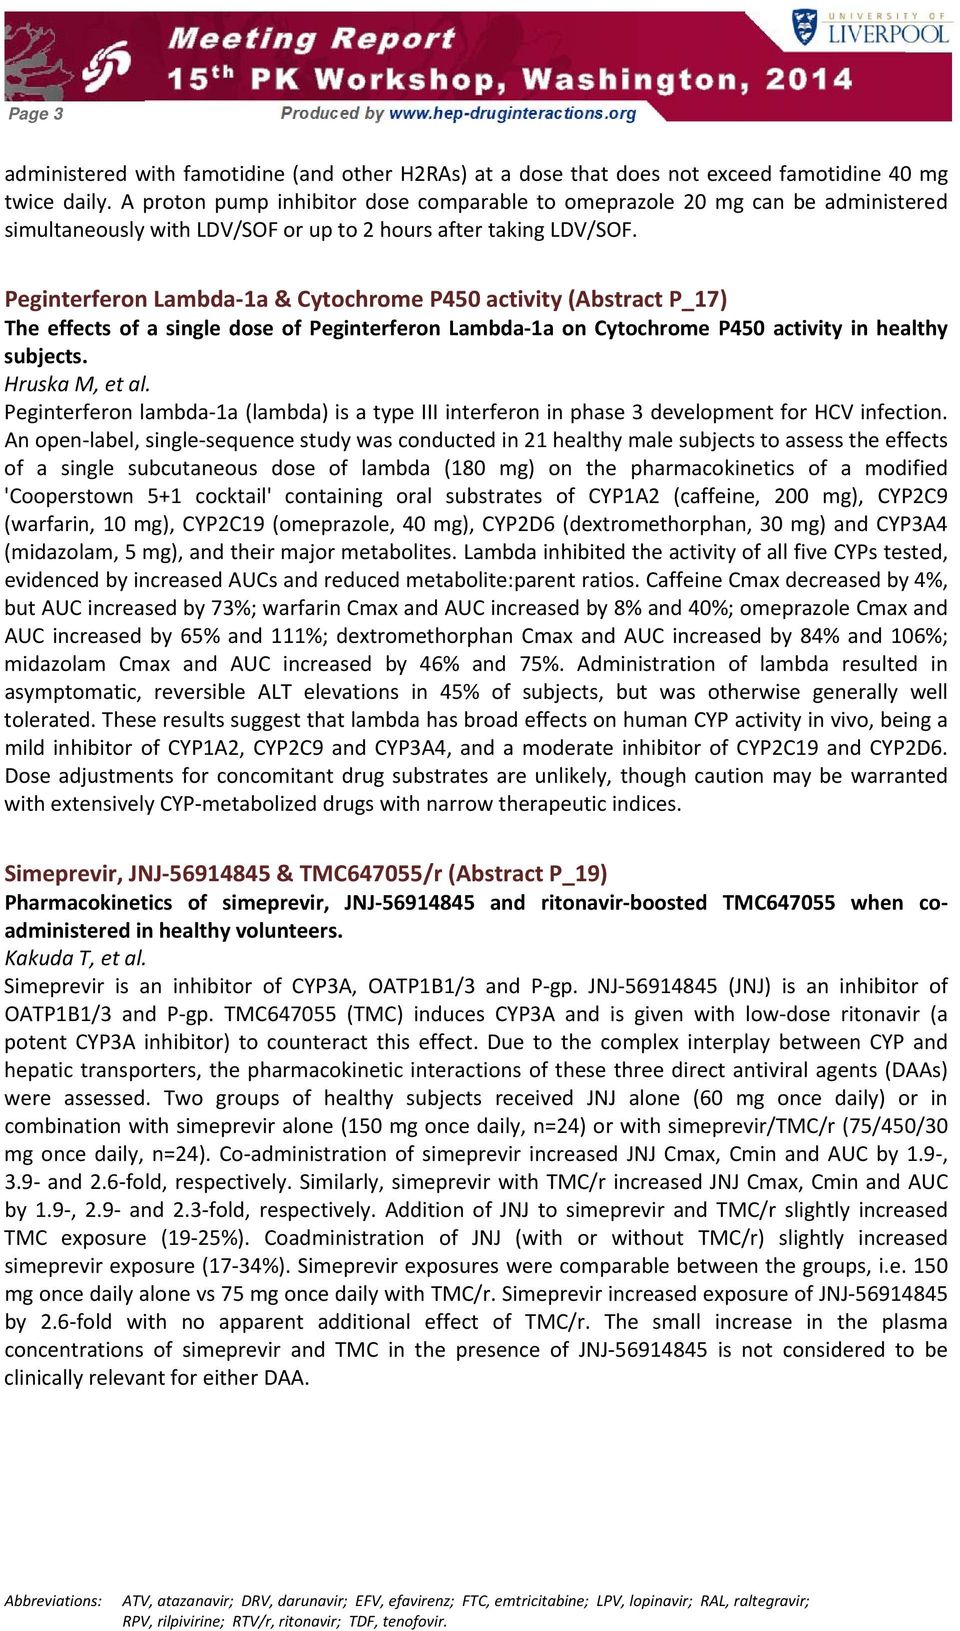 Peginterferon Lambda 1a & Cytochrome P450 activity (Abstract P_17) The effects of a single dose of Peginterferon Lambda 1a on Cytochrome P450 activity in healthy subjects. Hruska M, et al.